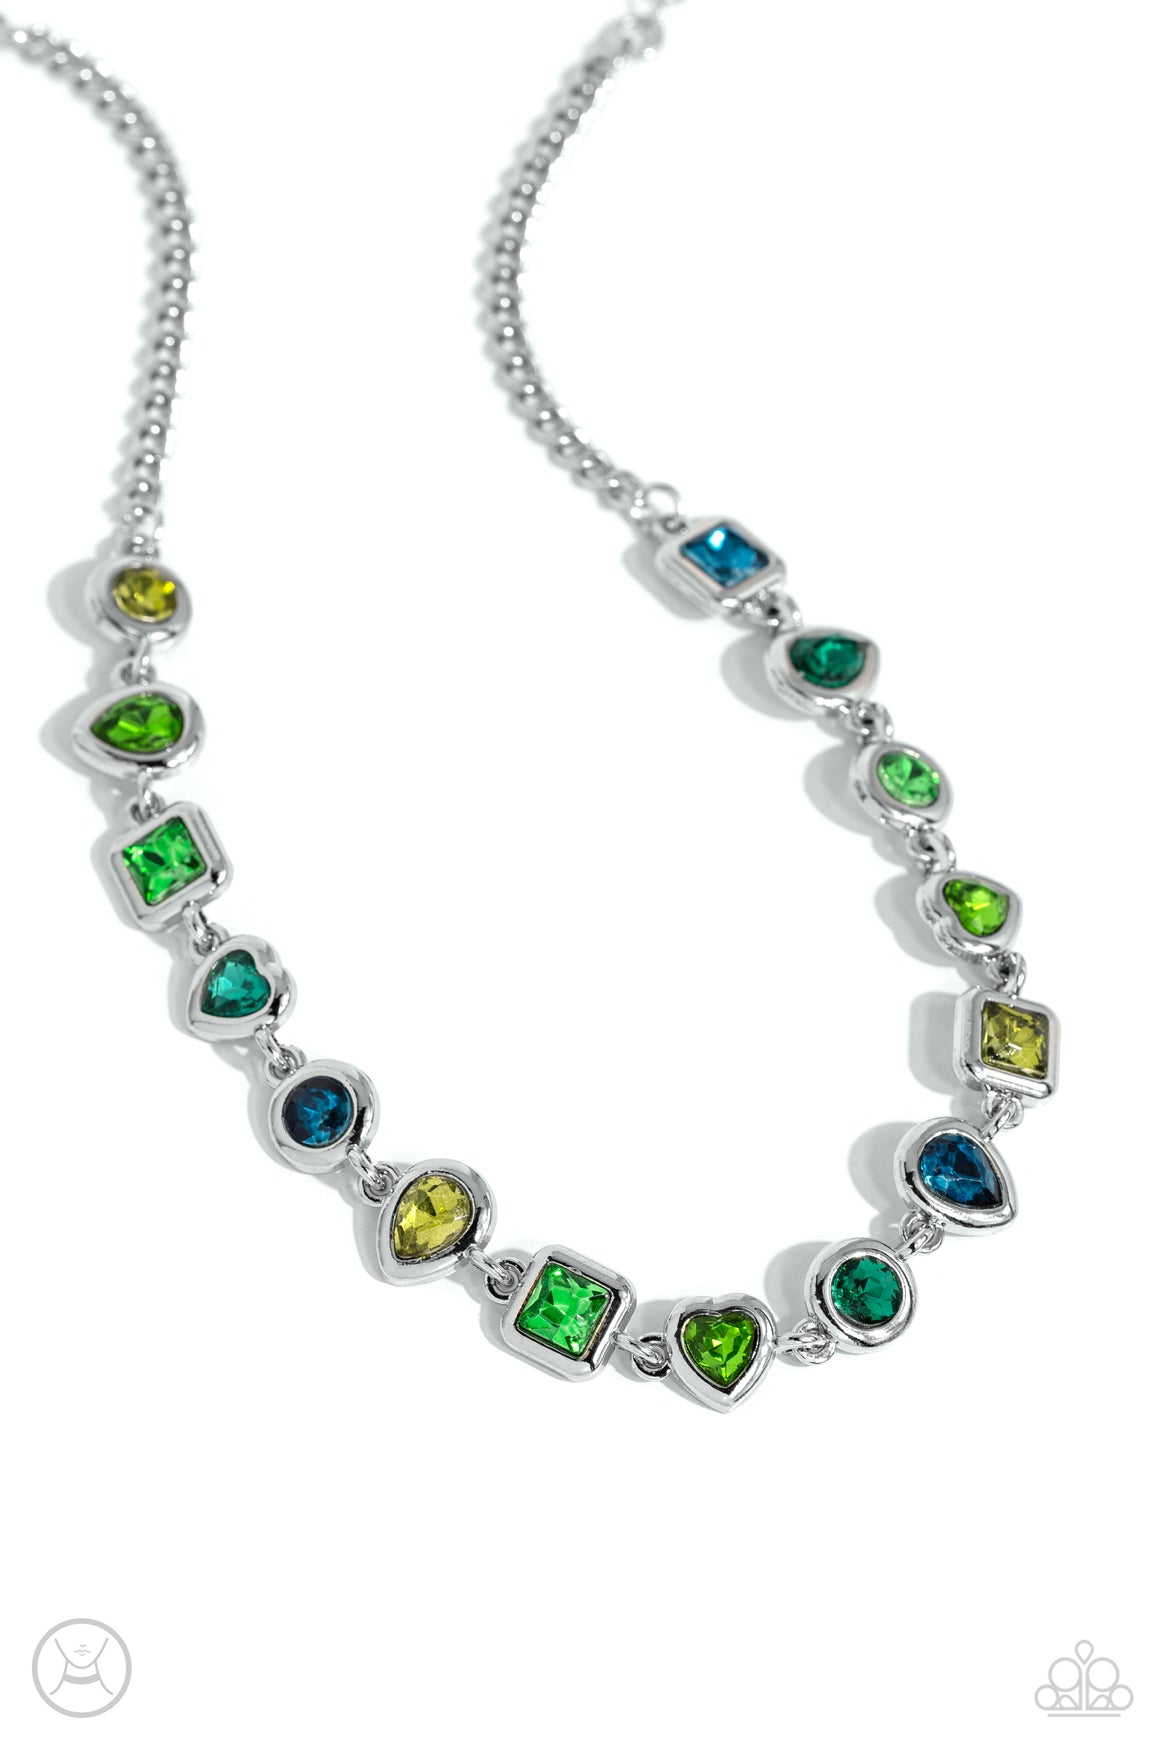 Paparazzi Jewelry Necklace & Earring Sets